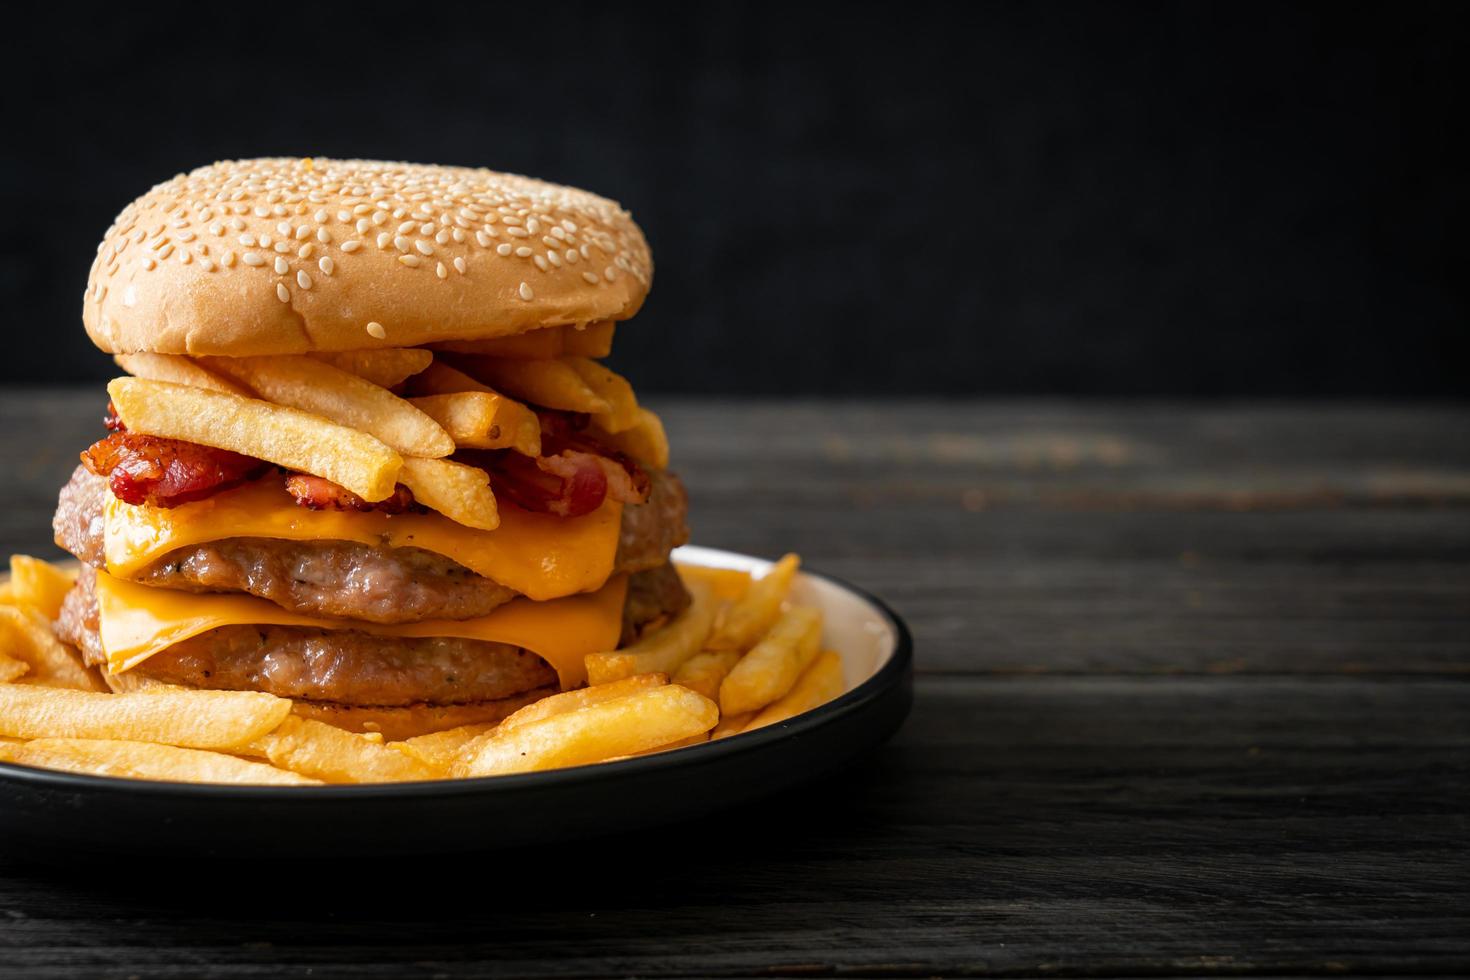 Pork hamburger or pork burger with cheese, bacon, and french fries photo